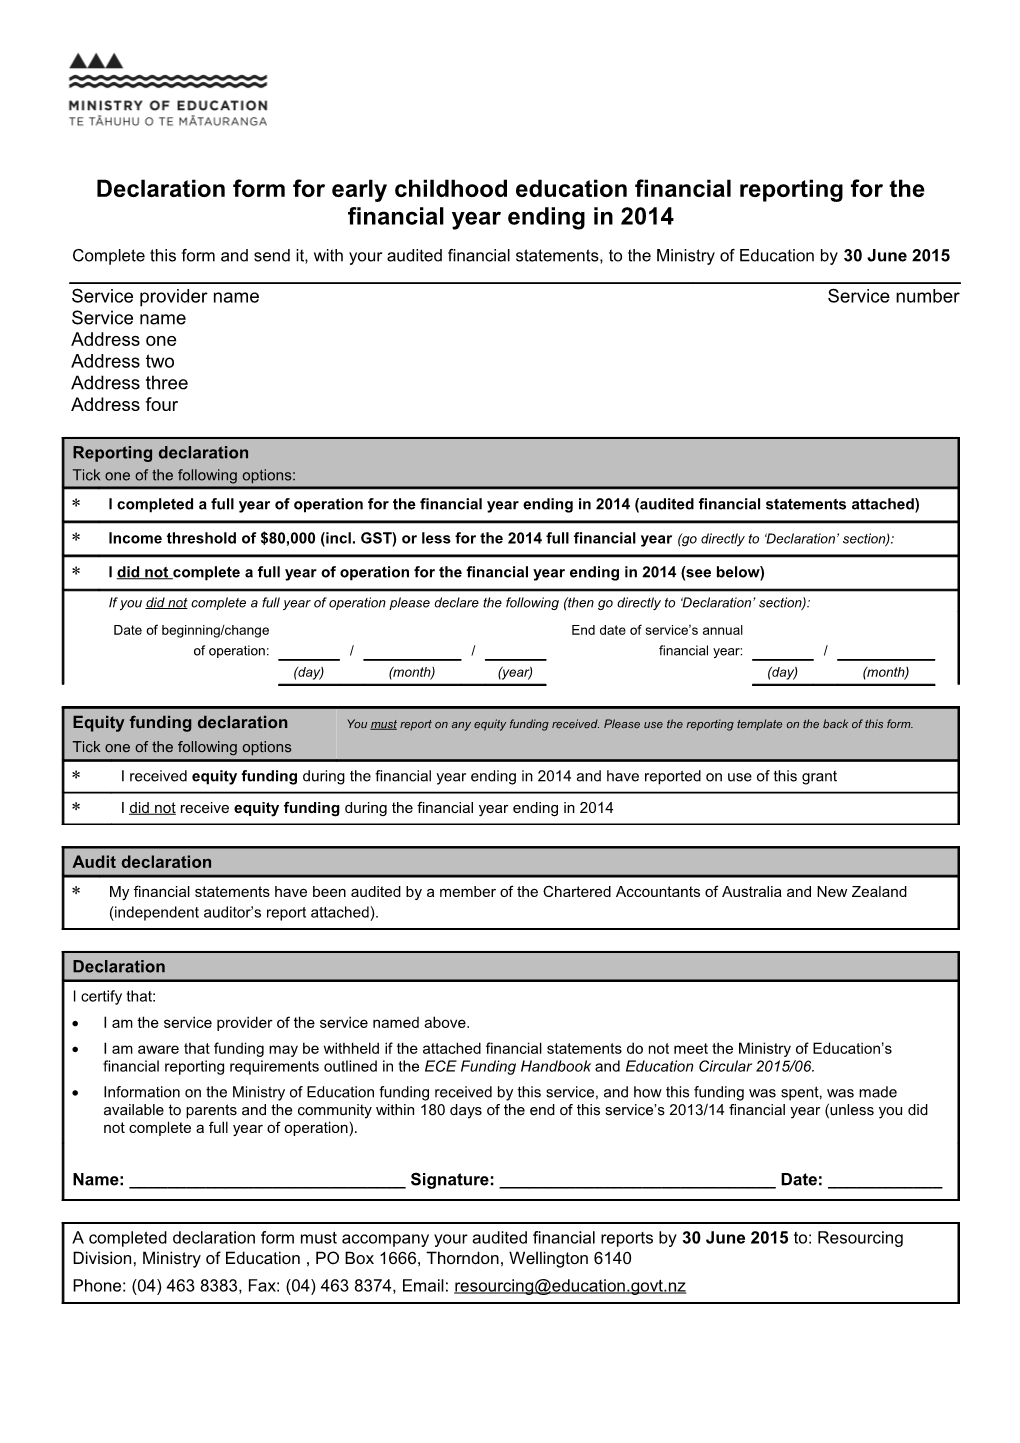 Declaration Form for Early Childhood Education Financial Reporting for the Financial Year